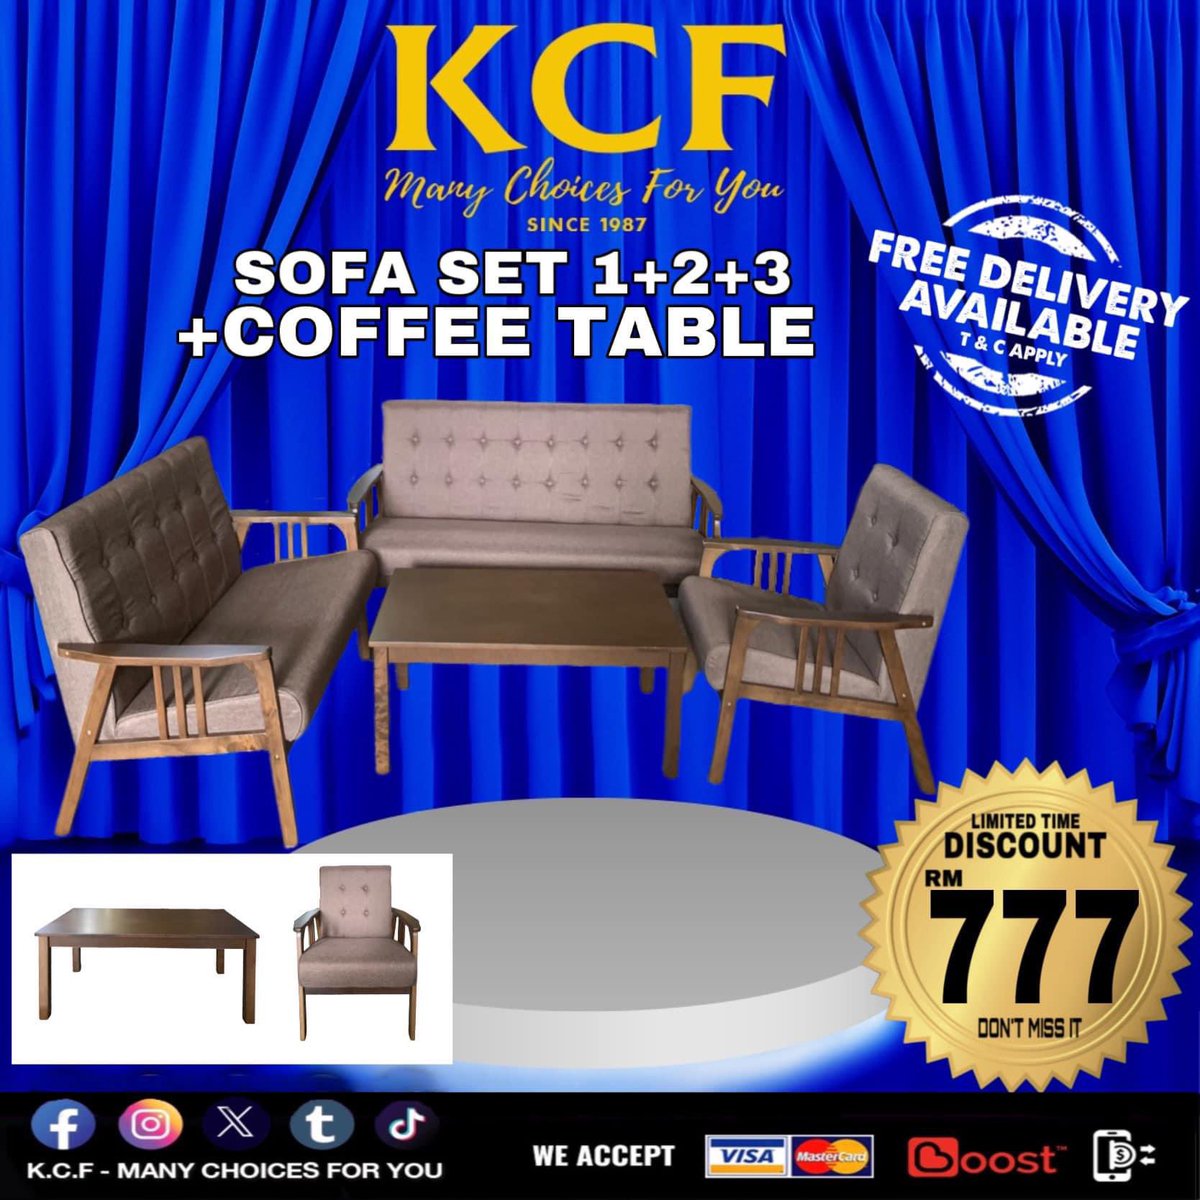 #NewProduct 🔥 

#SofaSet#RM777

#CCM > RM130 > 6months
 
❤️🧡💛💚💙💜🖤🤍🤎

#KCF💗

 #ManyChoicesForYou💘

#Boost ✅ are available.

#DebitCard ✅, #CreditCard ✅and 
#OnlineBanking ✅ are acceptable.

#Installment ✅0% interest for #PublicBank creditcard member.